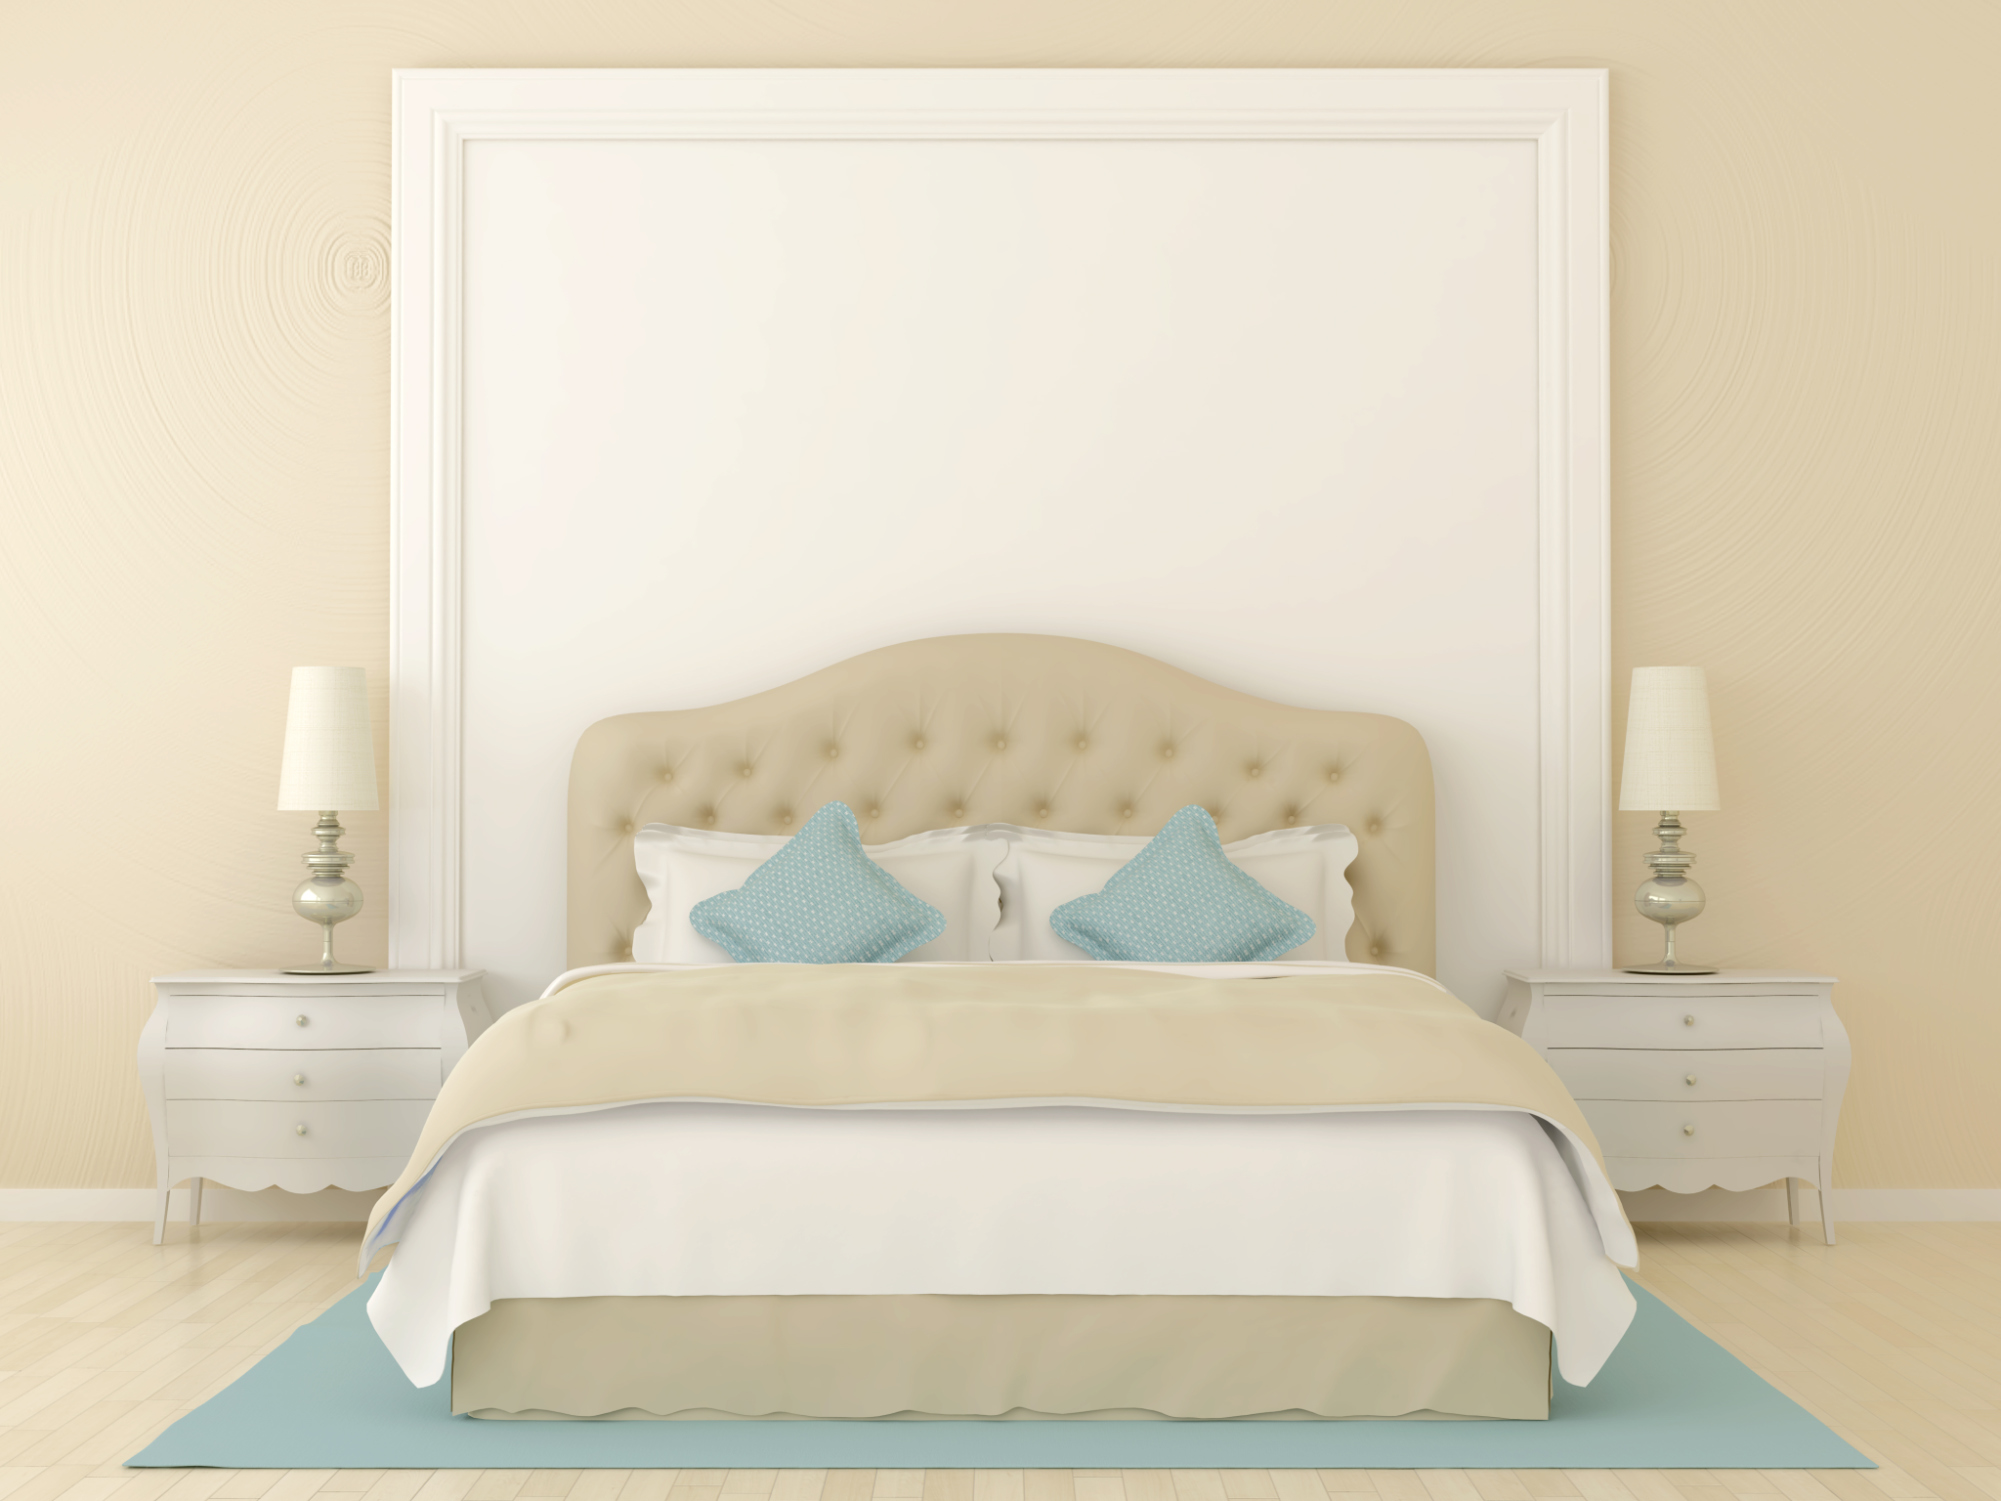 6 Ways to Make A Bed Skirt Stay In Place And Prevent Sliding